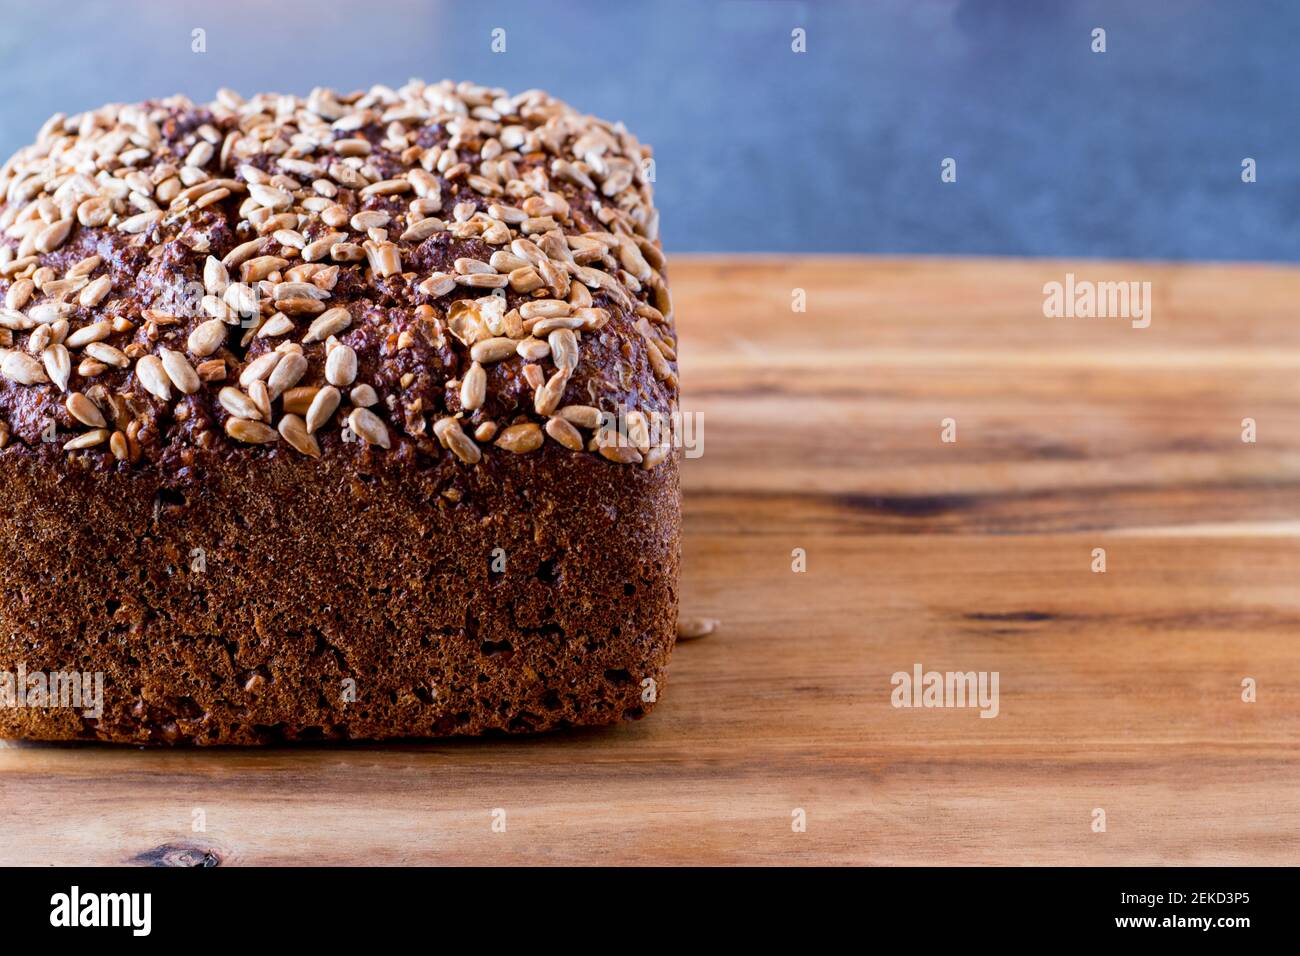 brown bread with sunflower seeds Stock Photo